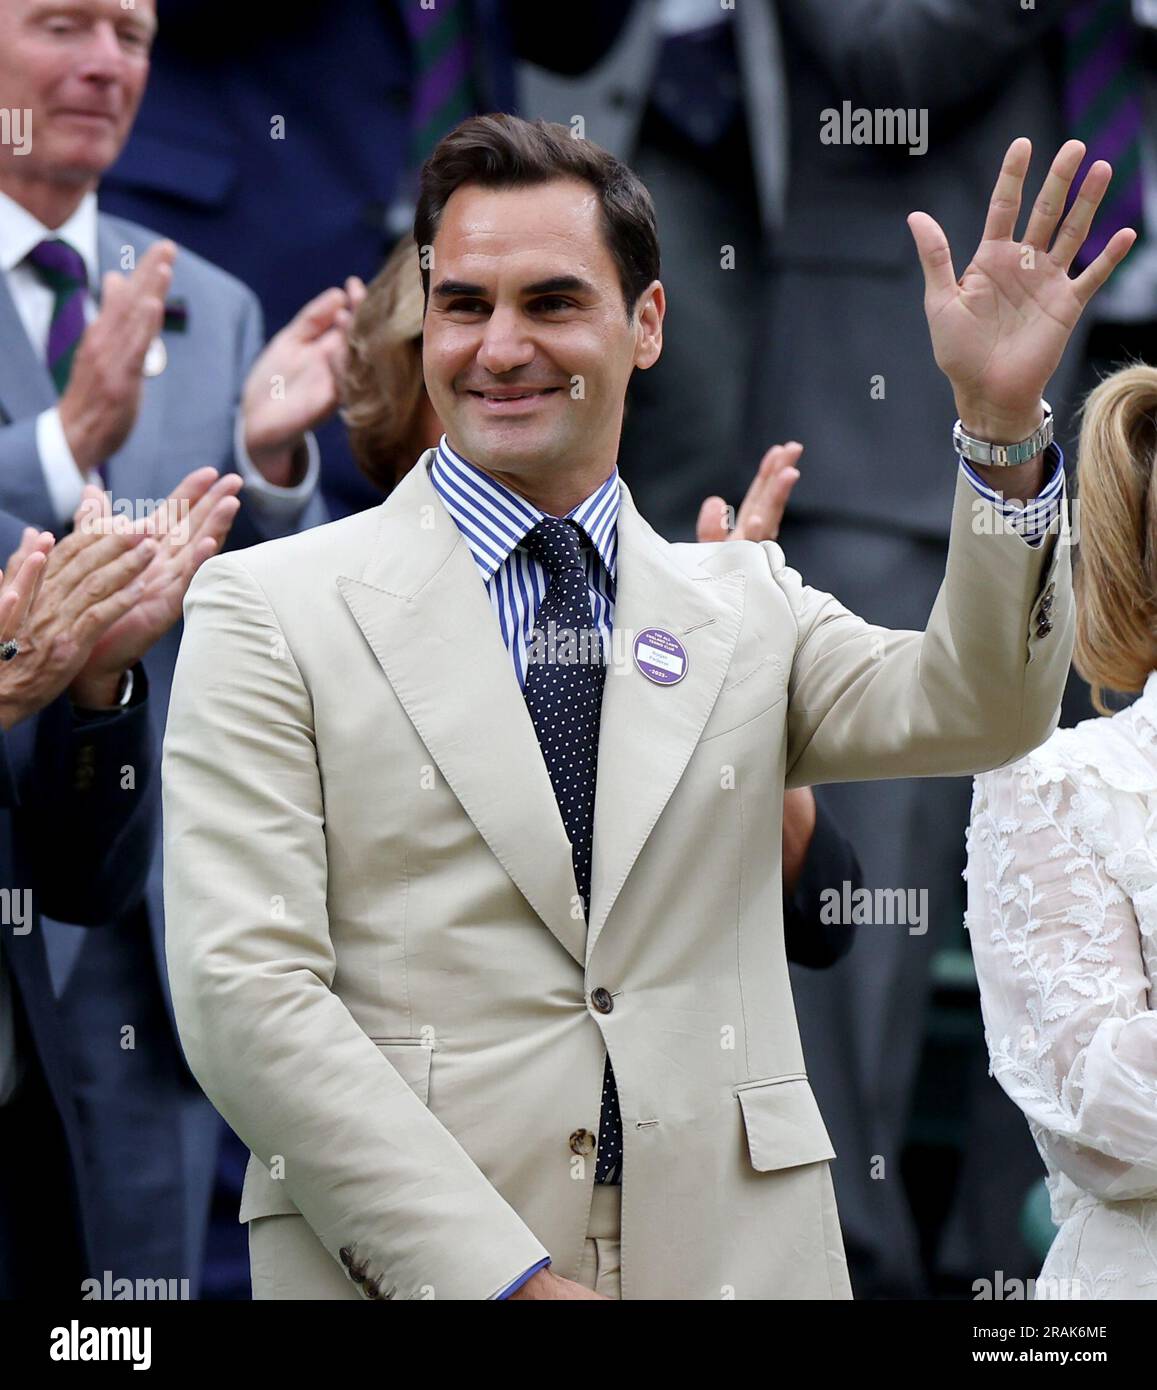 London, Britain. 4th July, 2023. Roger Federer waves to the spectators at Centre Court ahead of play on Day 2 of Wimbledon Tennis Championships in London, Britain, July 4, 2023. Credit: Li Ying/Xinhua/Alamy Live News Stock Photo